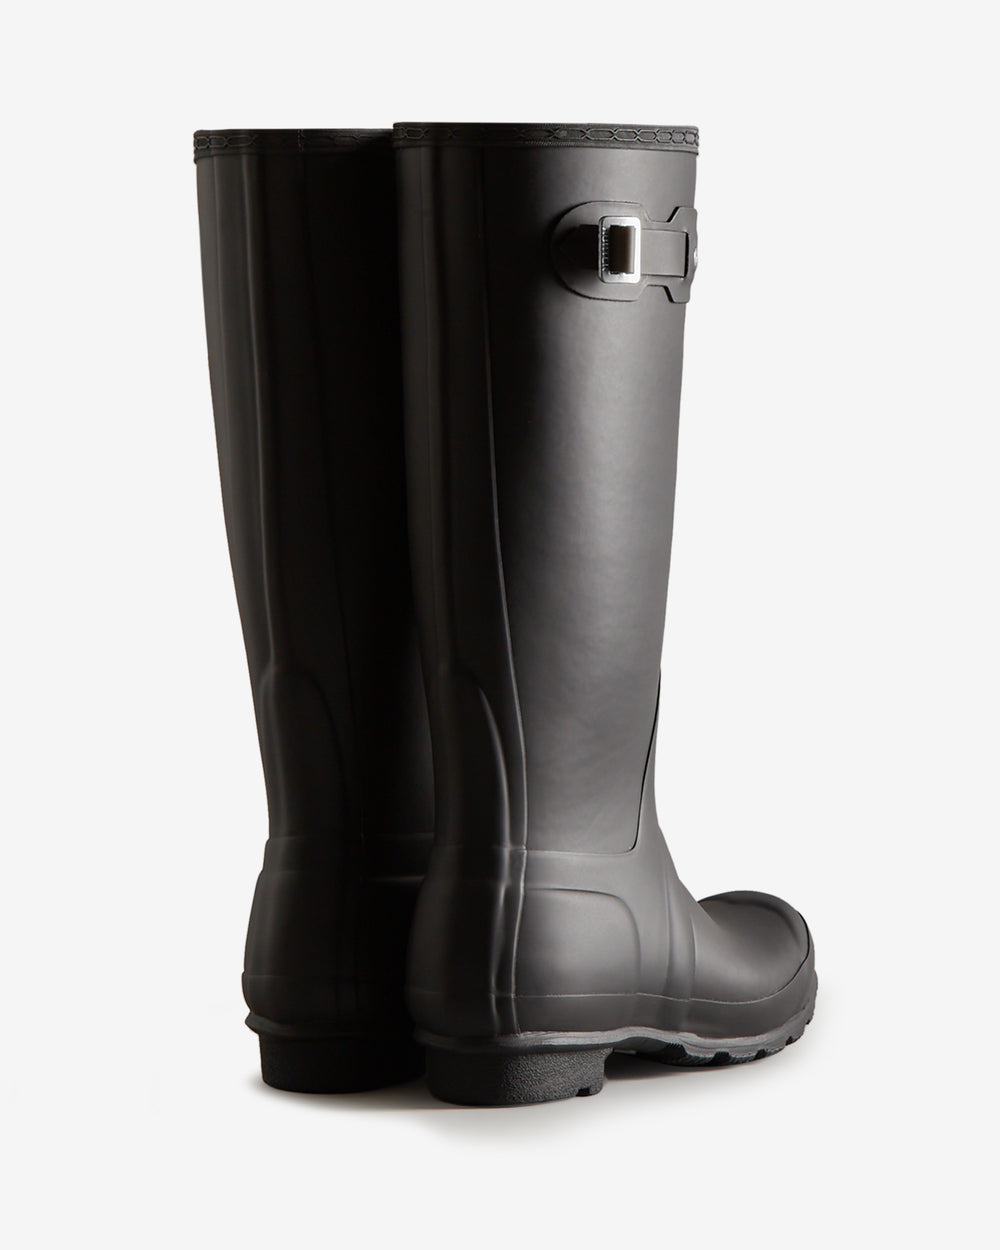 Women's Tall Insulated Wellington Boots